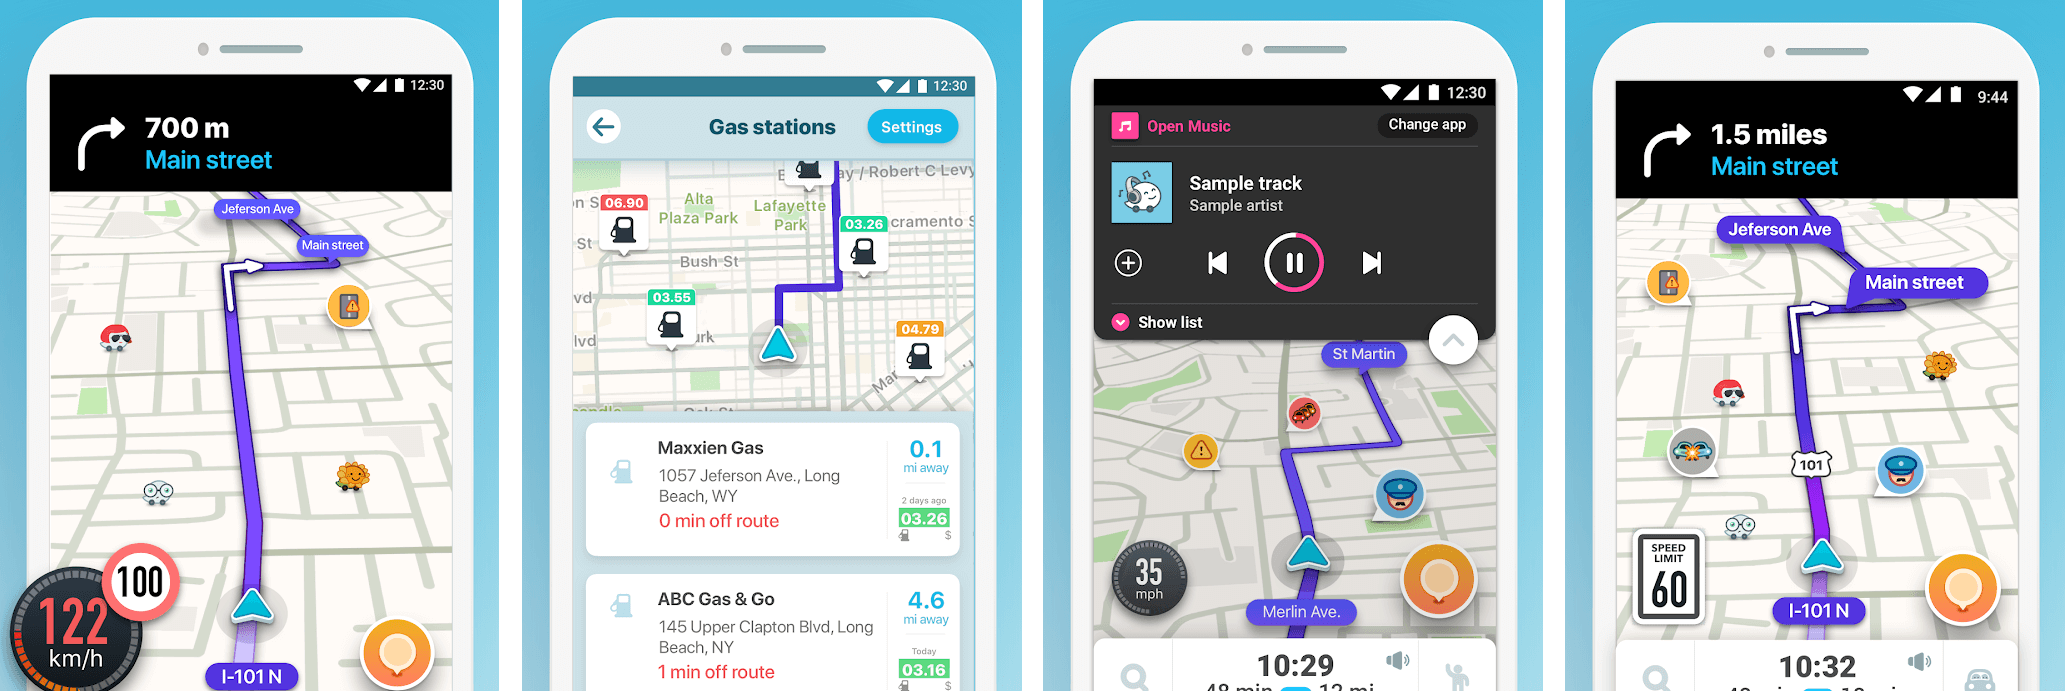 The Best 9 Free Tracking Apps with GPS - free time tracking mobile app - TimeCamp